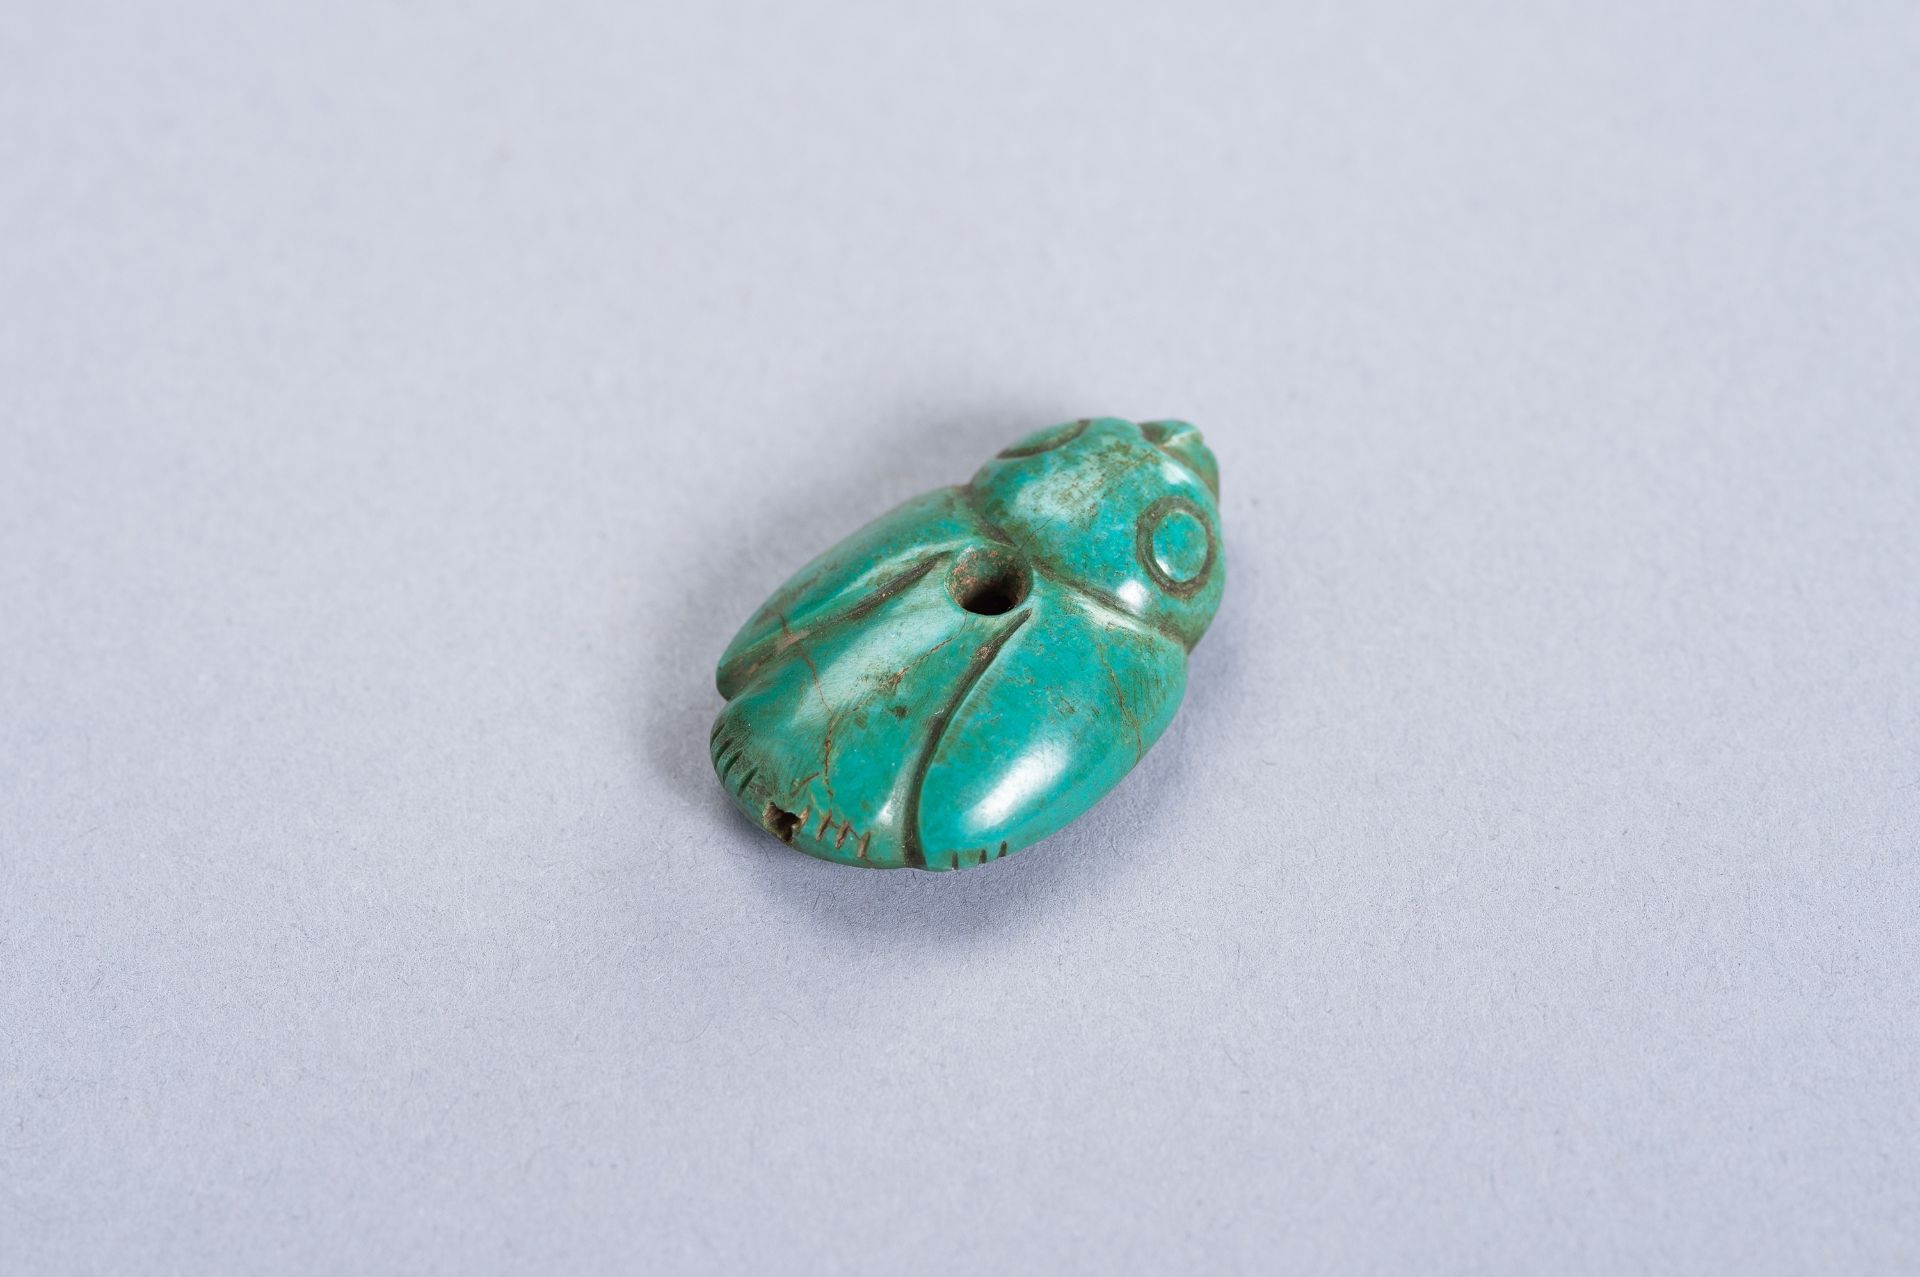 A TURQUOISE PENDANT OF A BIRD - Image 4 of 7